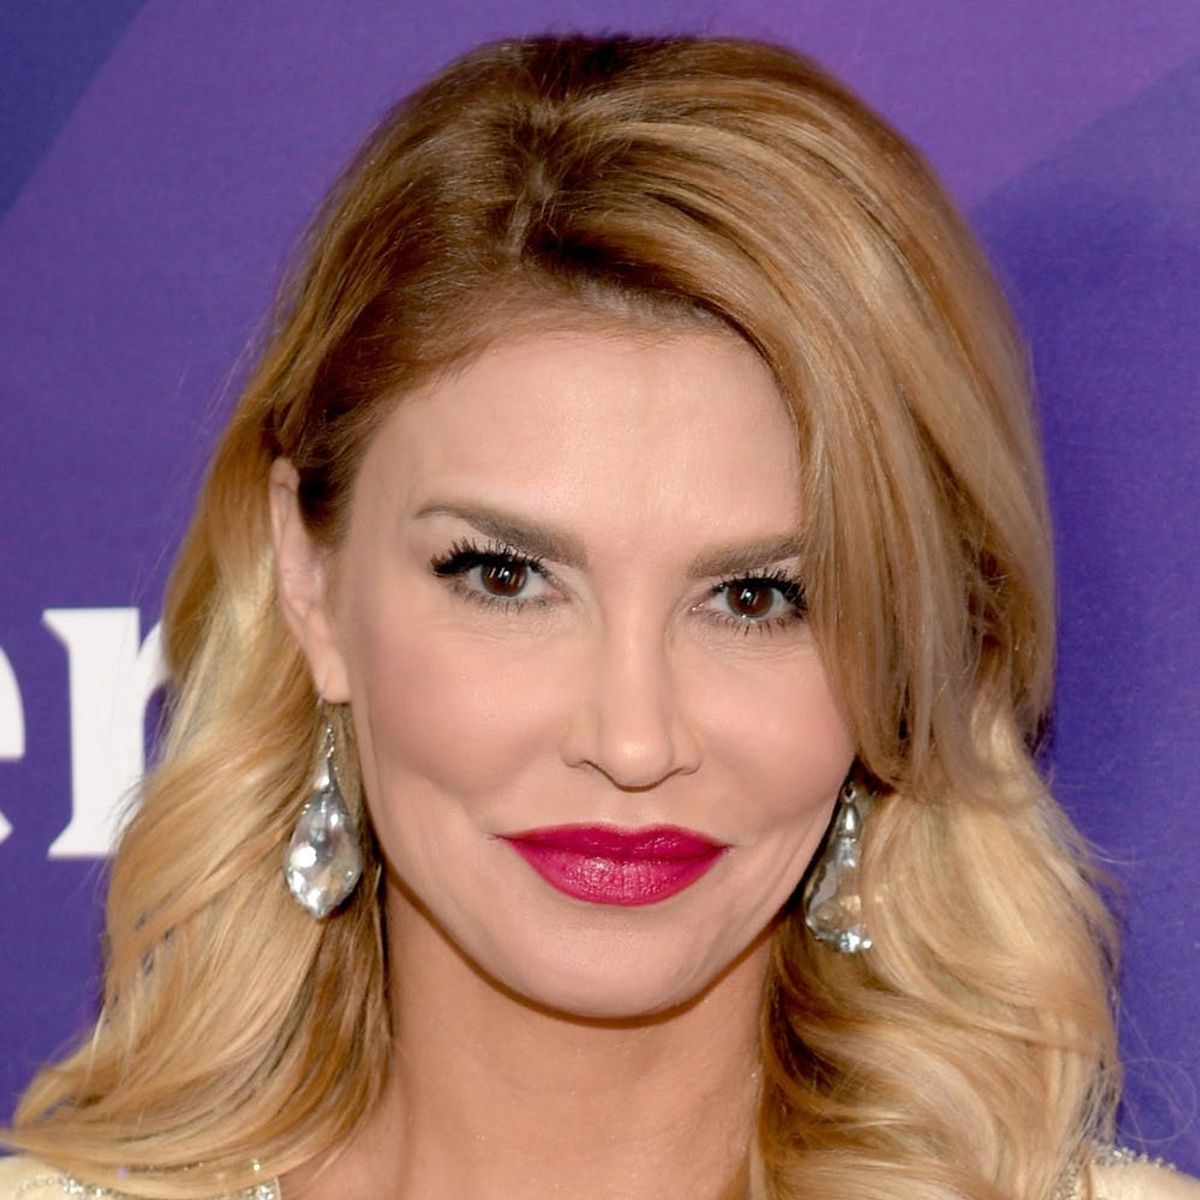 The Feud Between Brandi Glanville and LeAnn Rimes Reaches a Boiling Point As Eddie Cibrian Weighs In